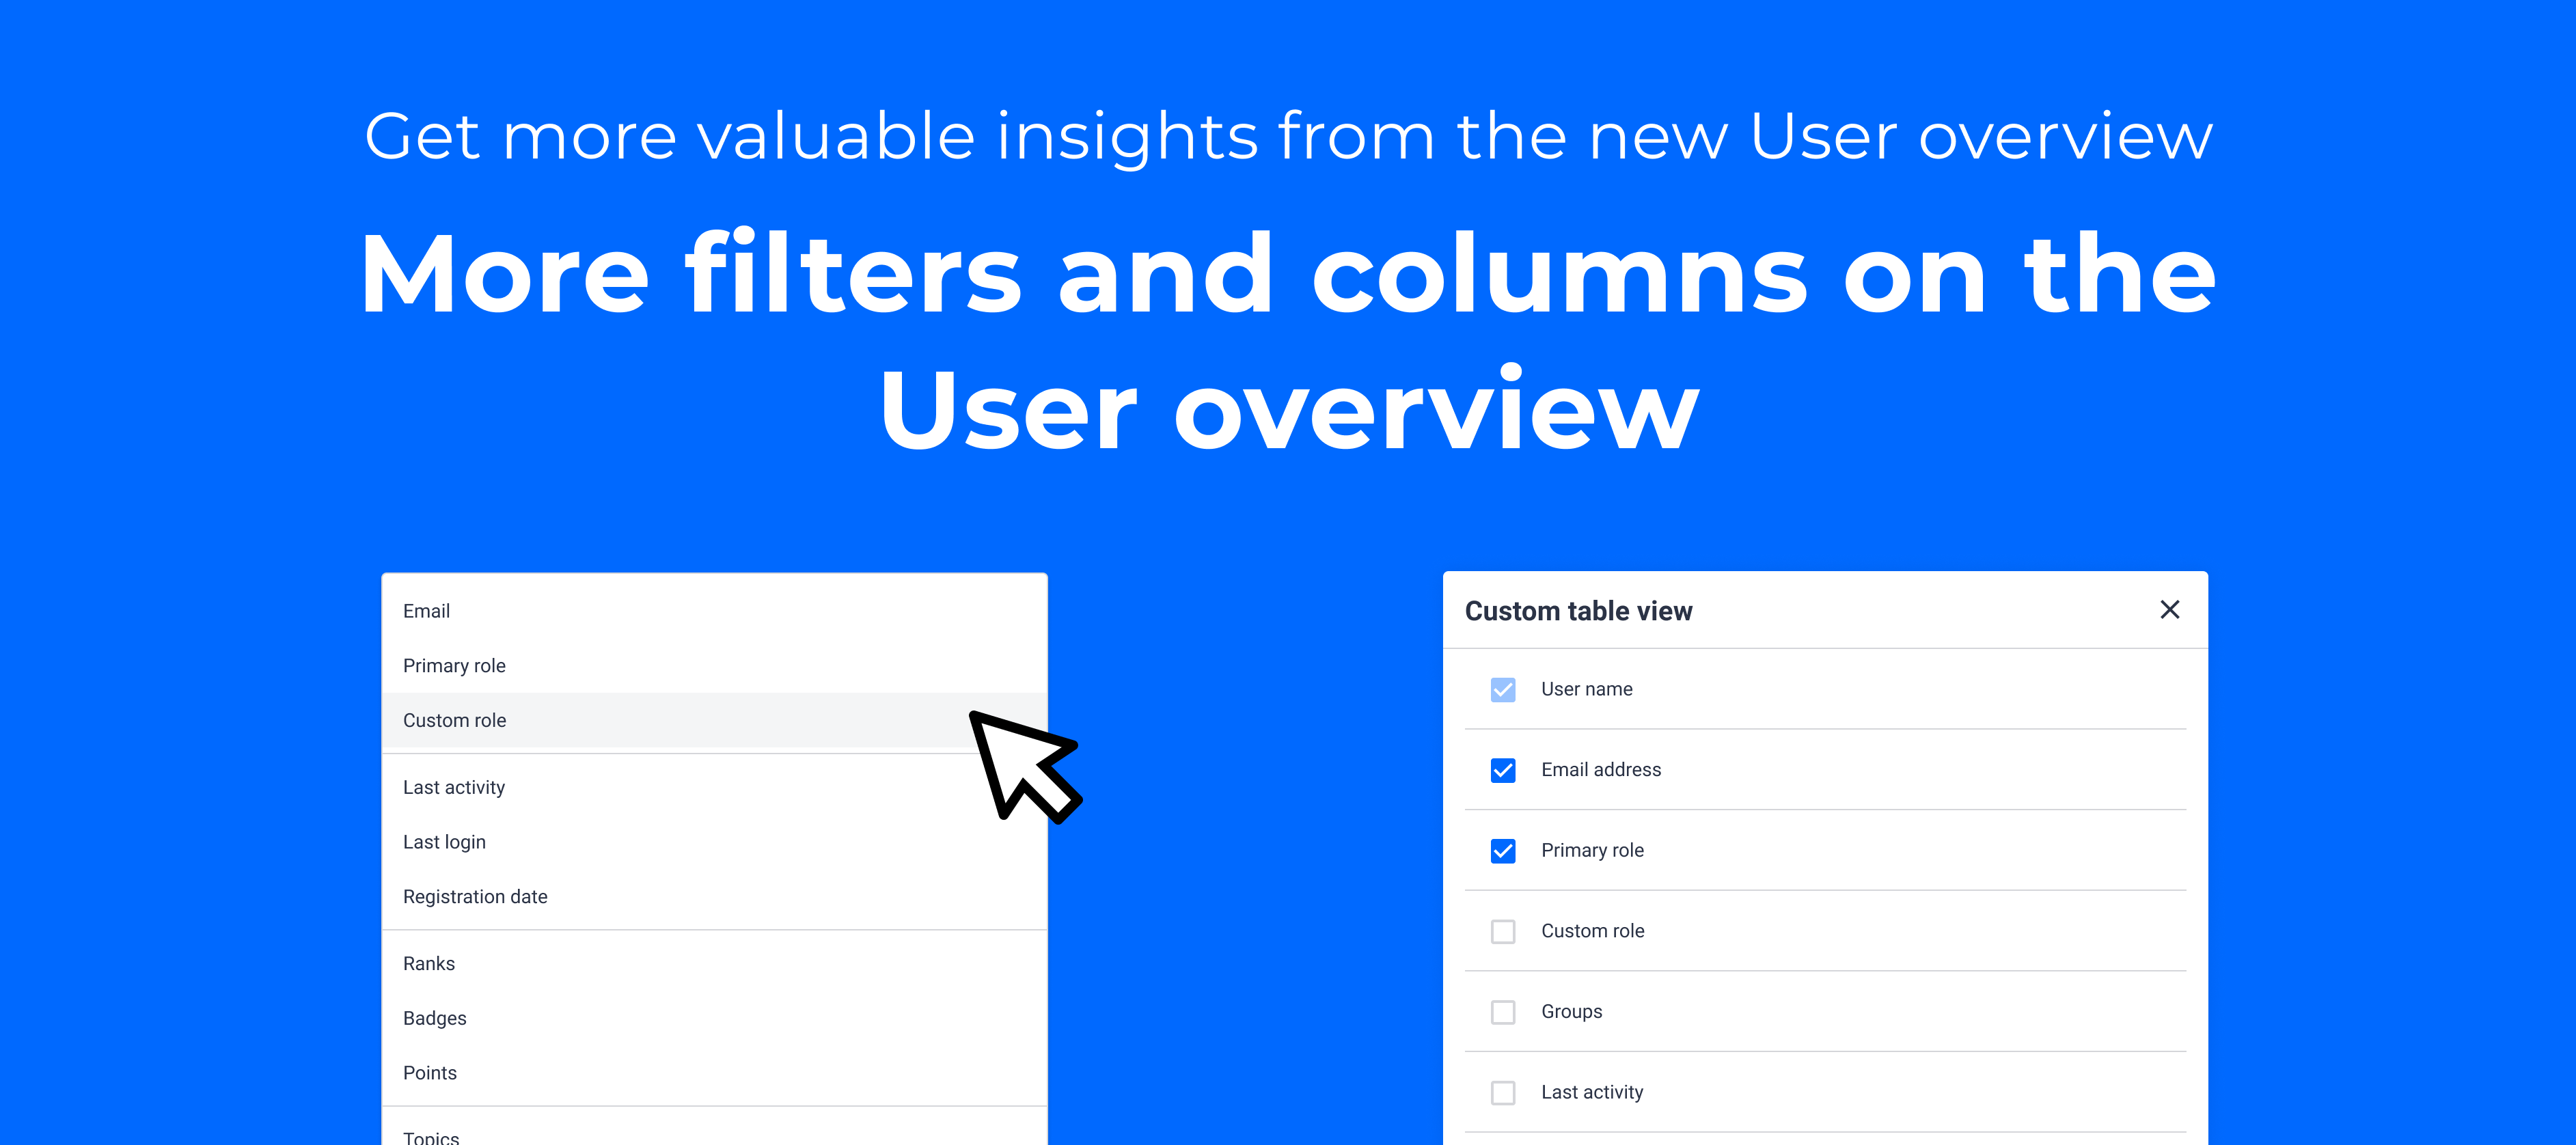 More filters and columns on the User overview